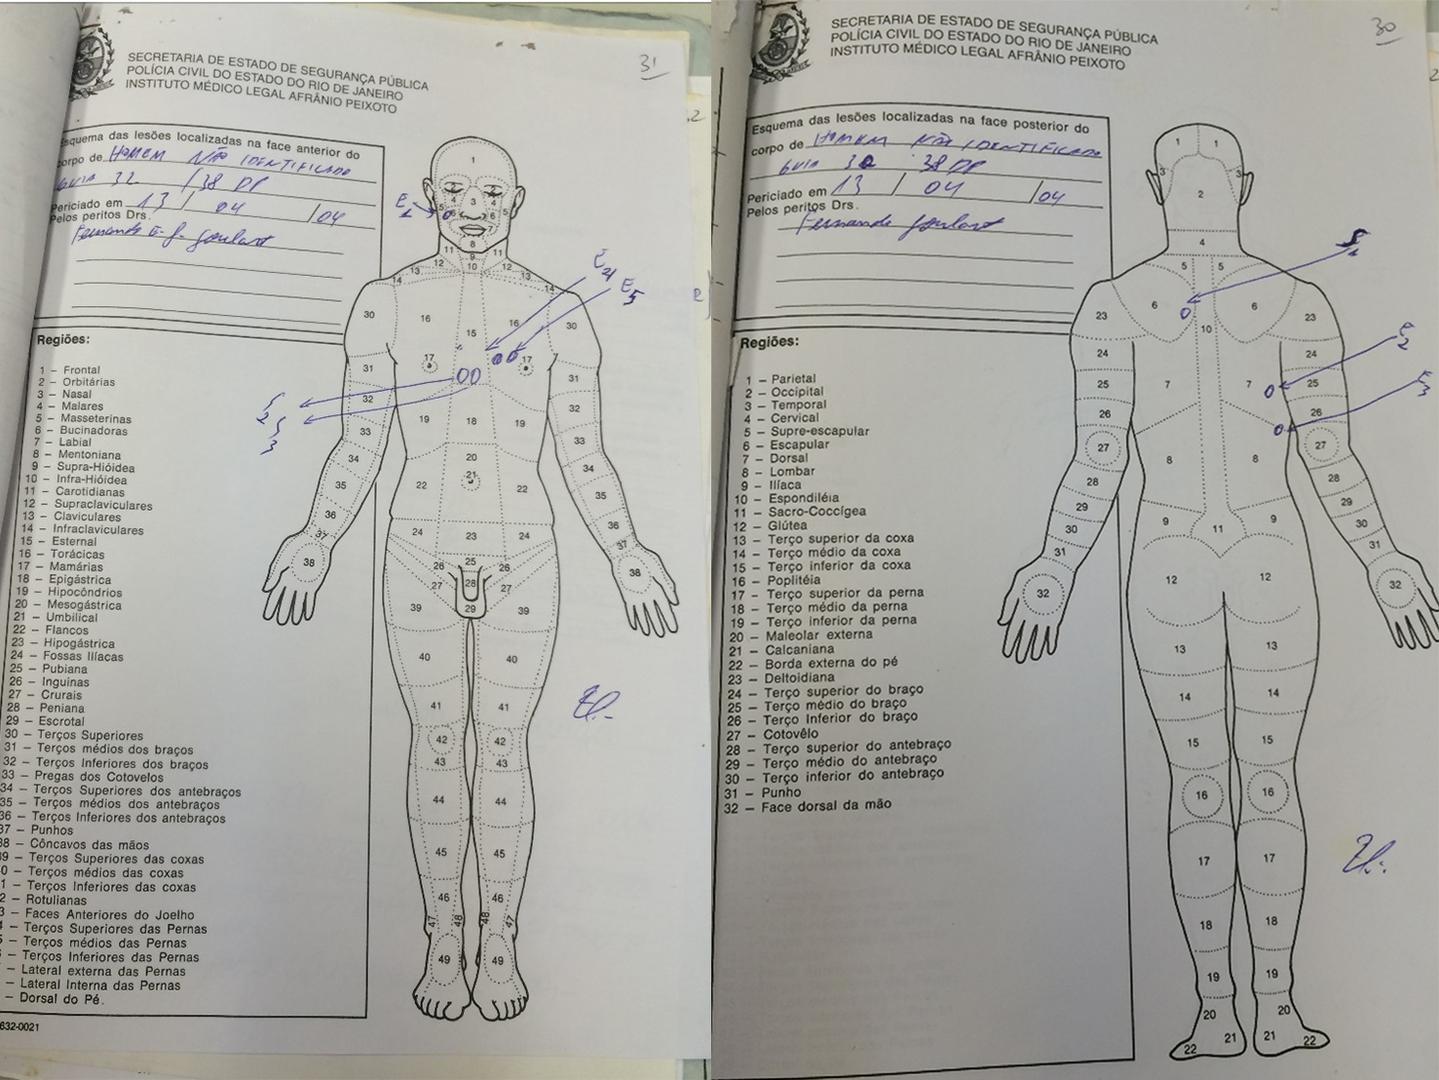 The autopsy diagram on the left shows one entry wound in the face (marked “E1”) of the victim, Leandro Ferraz Freitas, two entry wounds in the chest, very close to each other (marked “E4,” and “E5,”), and two exit wounds (marked “S2” and “S3”). 